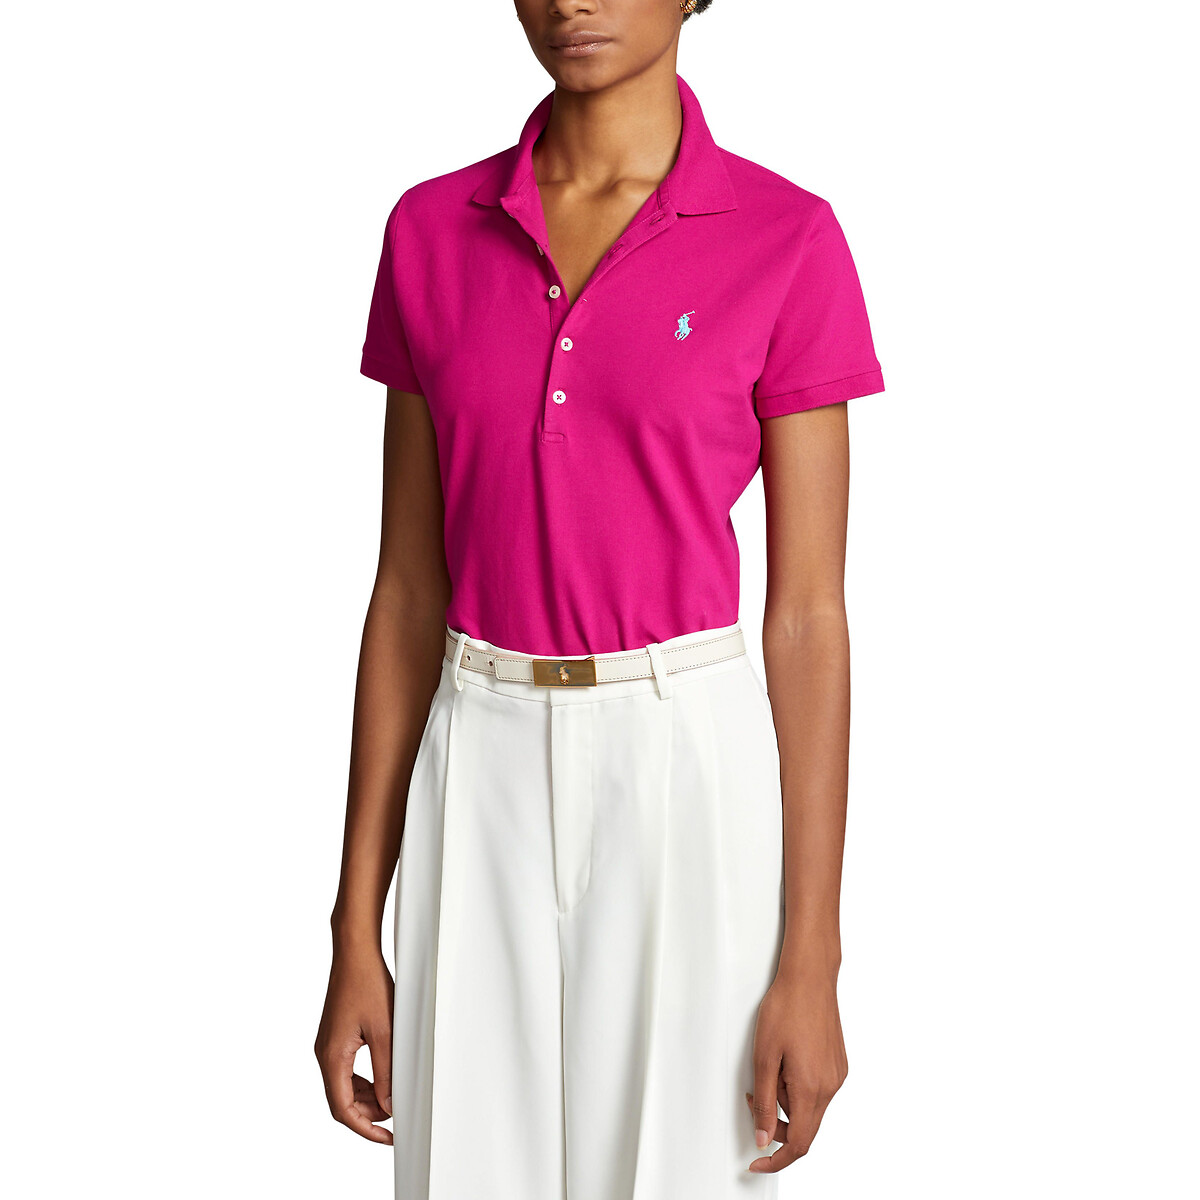 Embroidered cotton polo shirt with short sleeves , pink, Polo Ralph Lauren  | La Redoute